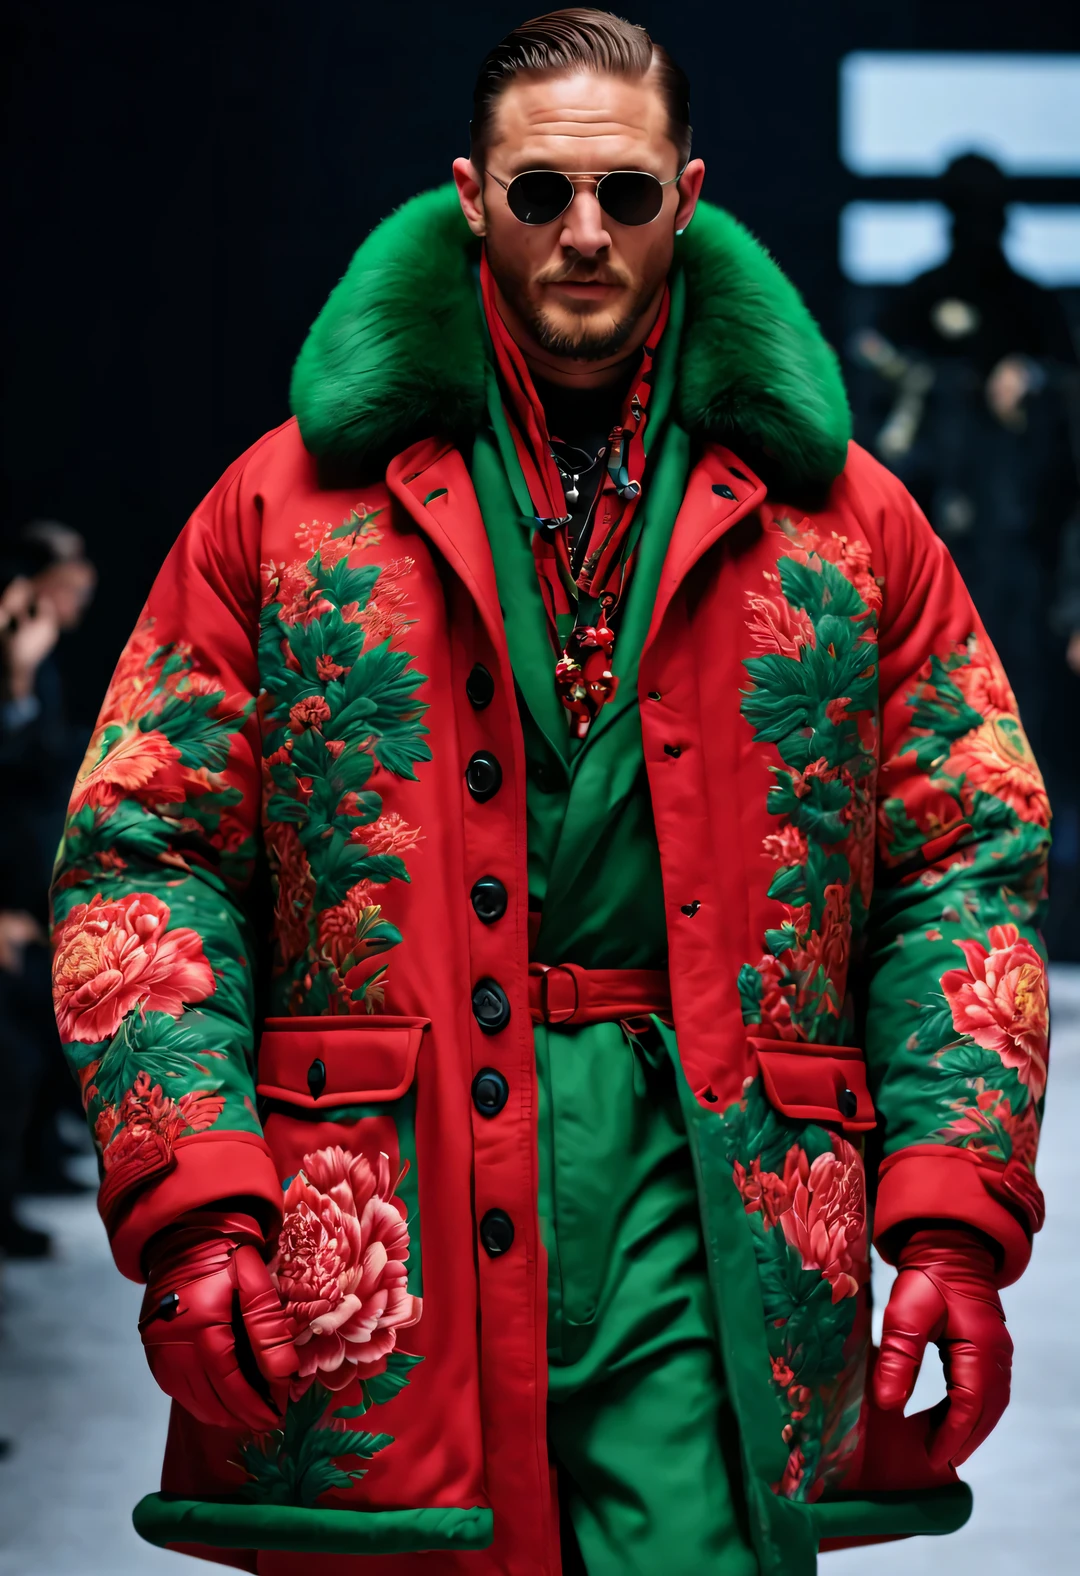 red stormtrooper, Playful new fashion style, A tall and handsome male model, Tom Hardy, wore a cotton coat made of thick red and green peony coarse fabric: 1.34), a cotton coat with warm and windproof functions, peony flower, Leaves, embroidery, With big red and green peony pattern as the theme, (tawny fur coat collar), tibetan shaman jewelry, complex patterns,
Embroidered Suzhou embroidery bright red parka snow coat, (exceed) coat, Black Sweater, jeans, winter scarf warm scarf, duckbill cap, gloves gloves, belt, Cotton boots, sunglasses, Combat boots, sports shoes, big photography, whole body,
background: Indoor T runway, T runway, (snowing), snow,